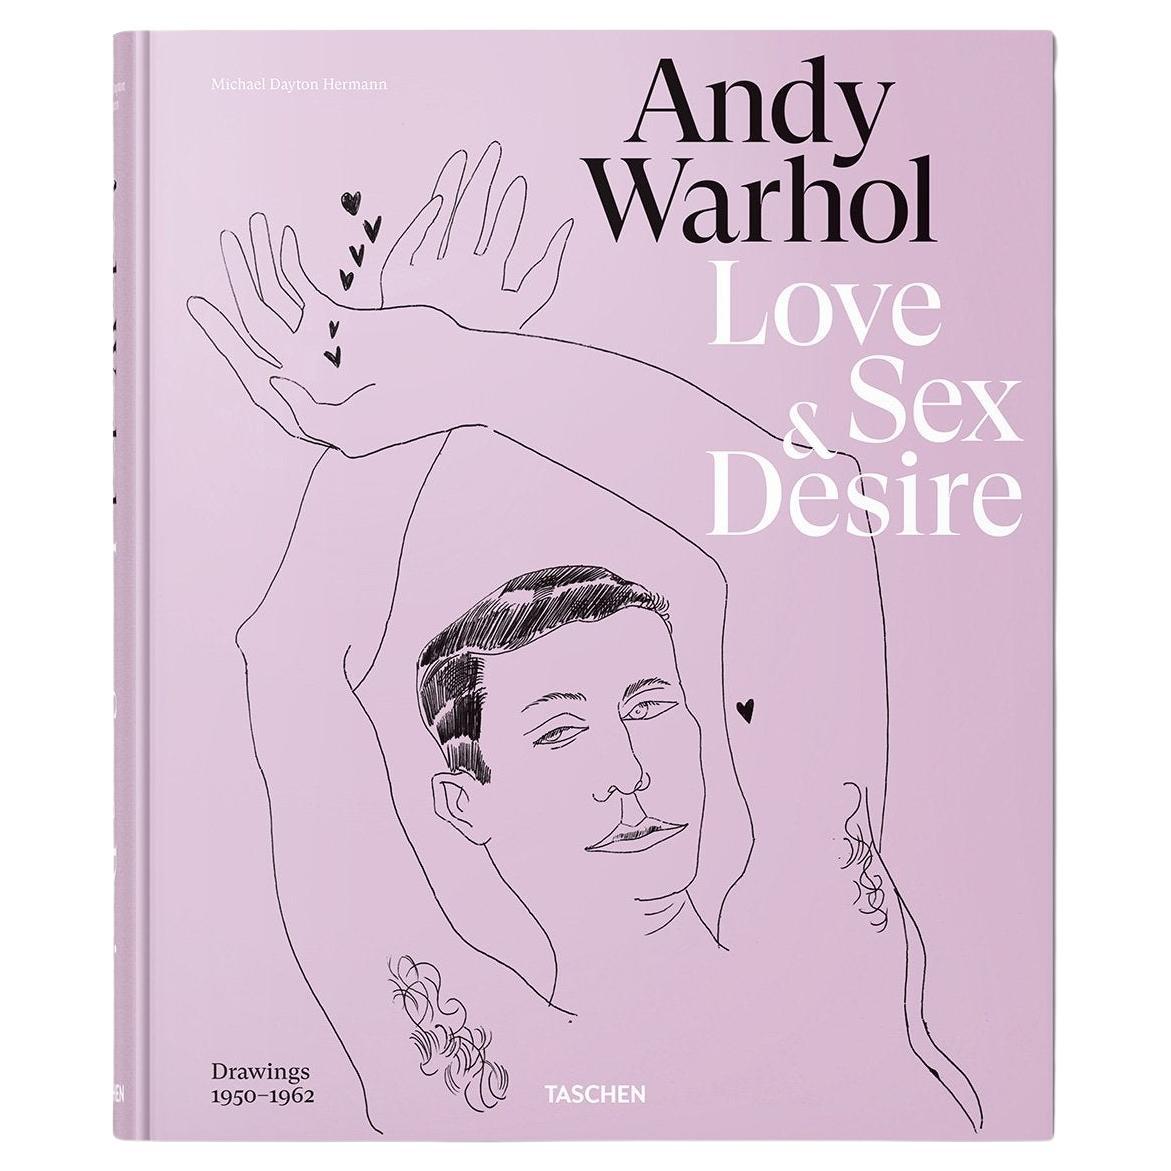 Andy Warhol, Love, Sex, and Desire, Drawings 1950–1962